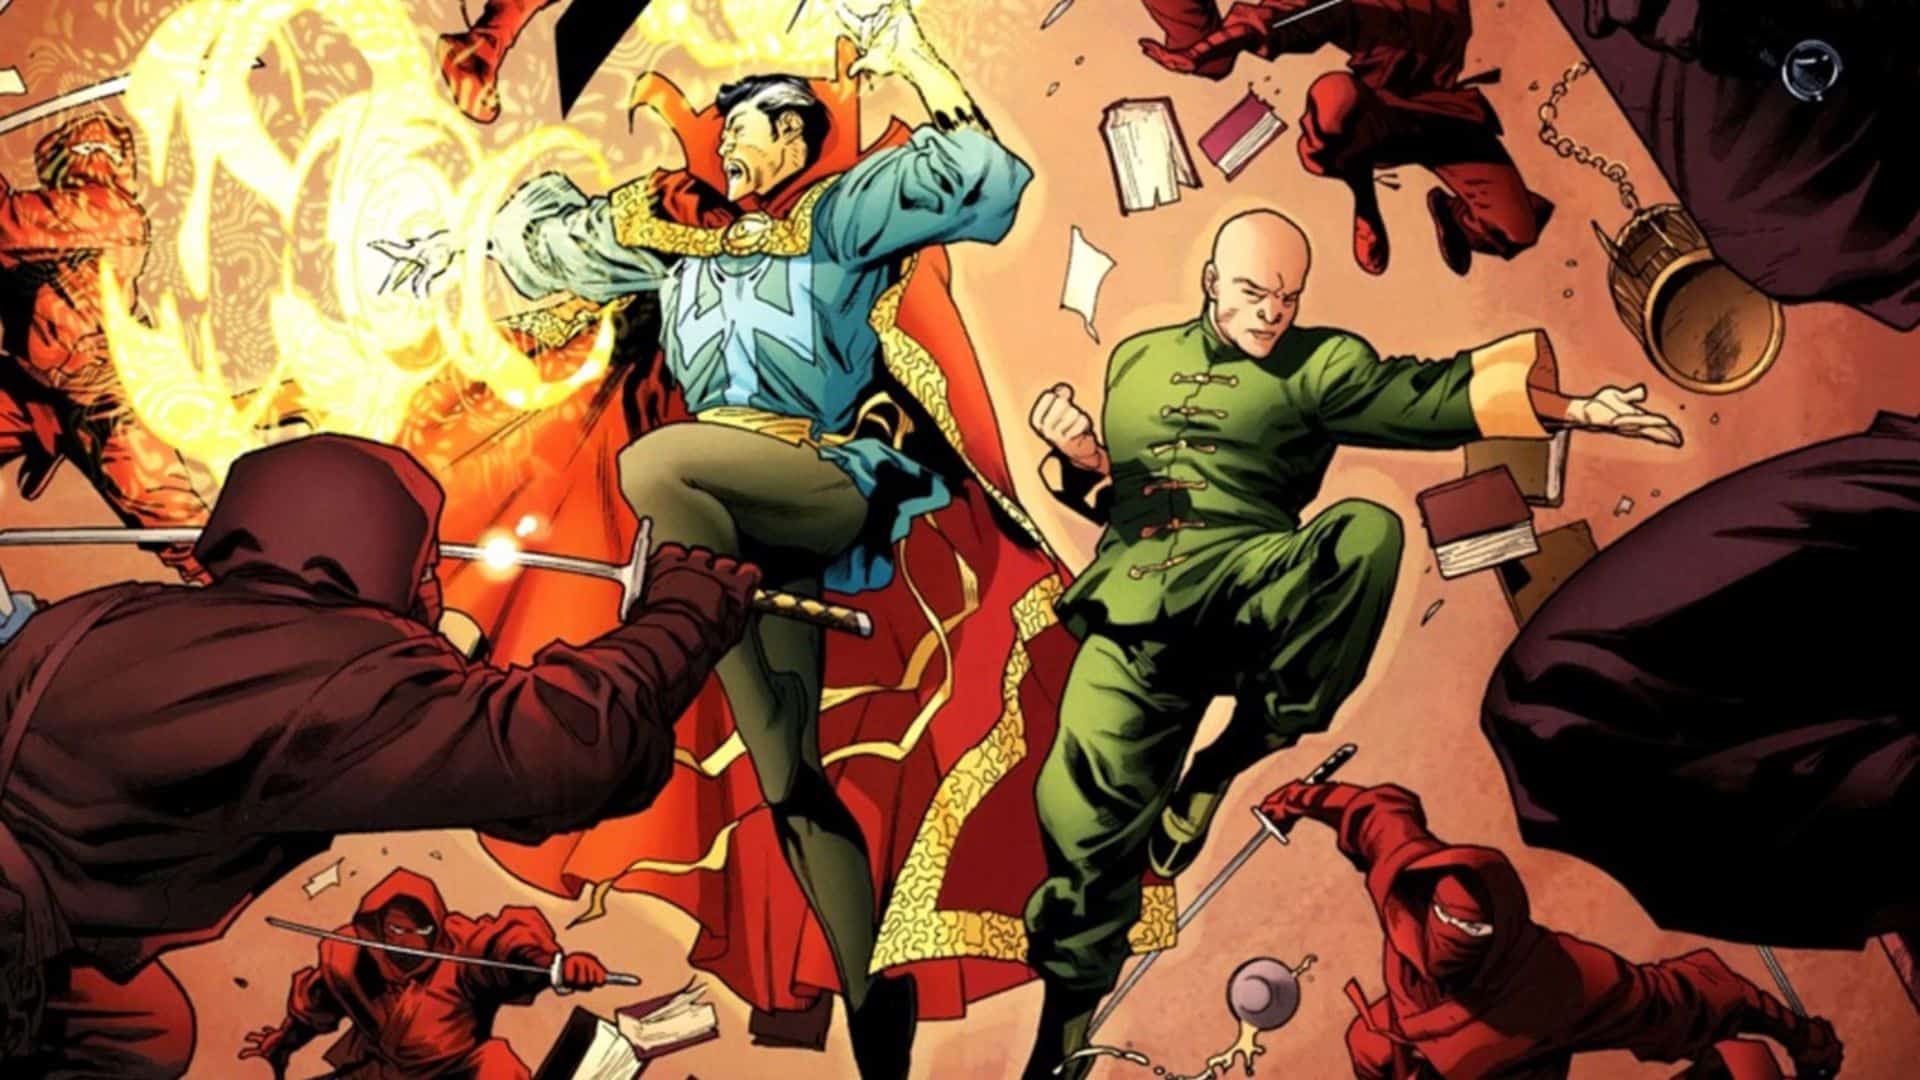 The 10 Greatest Superhero Partners in Marvel Comics - Doctor Strange and Wong